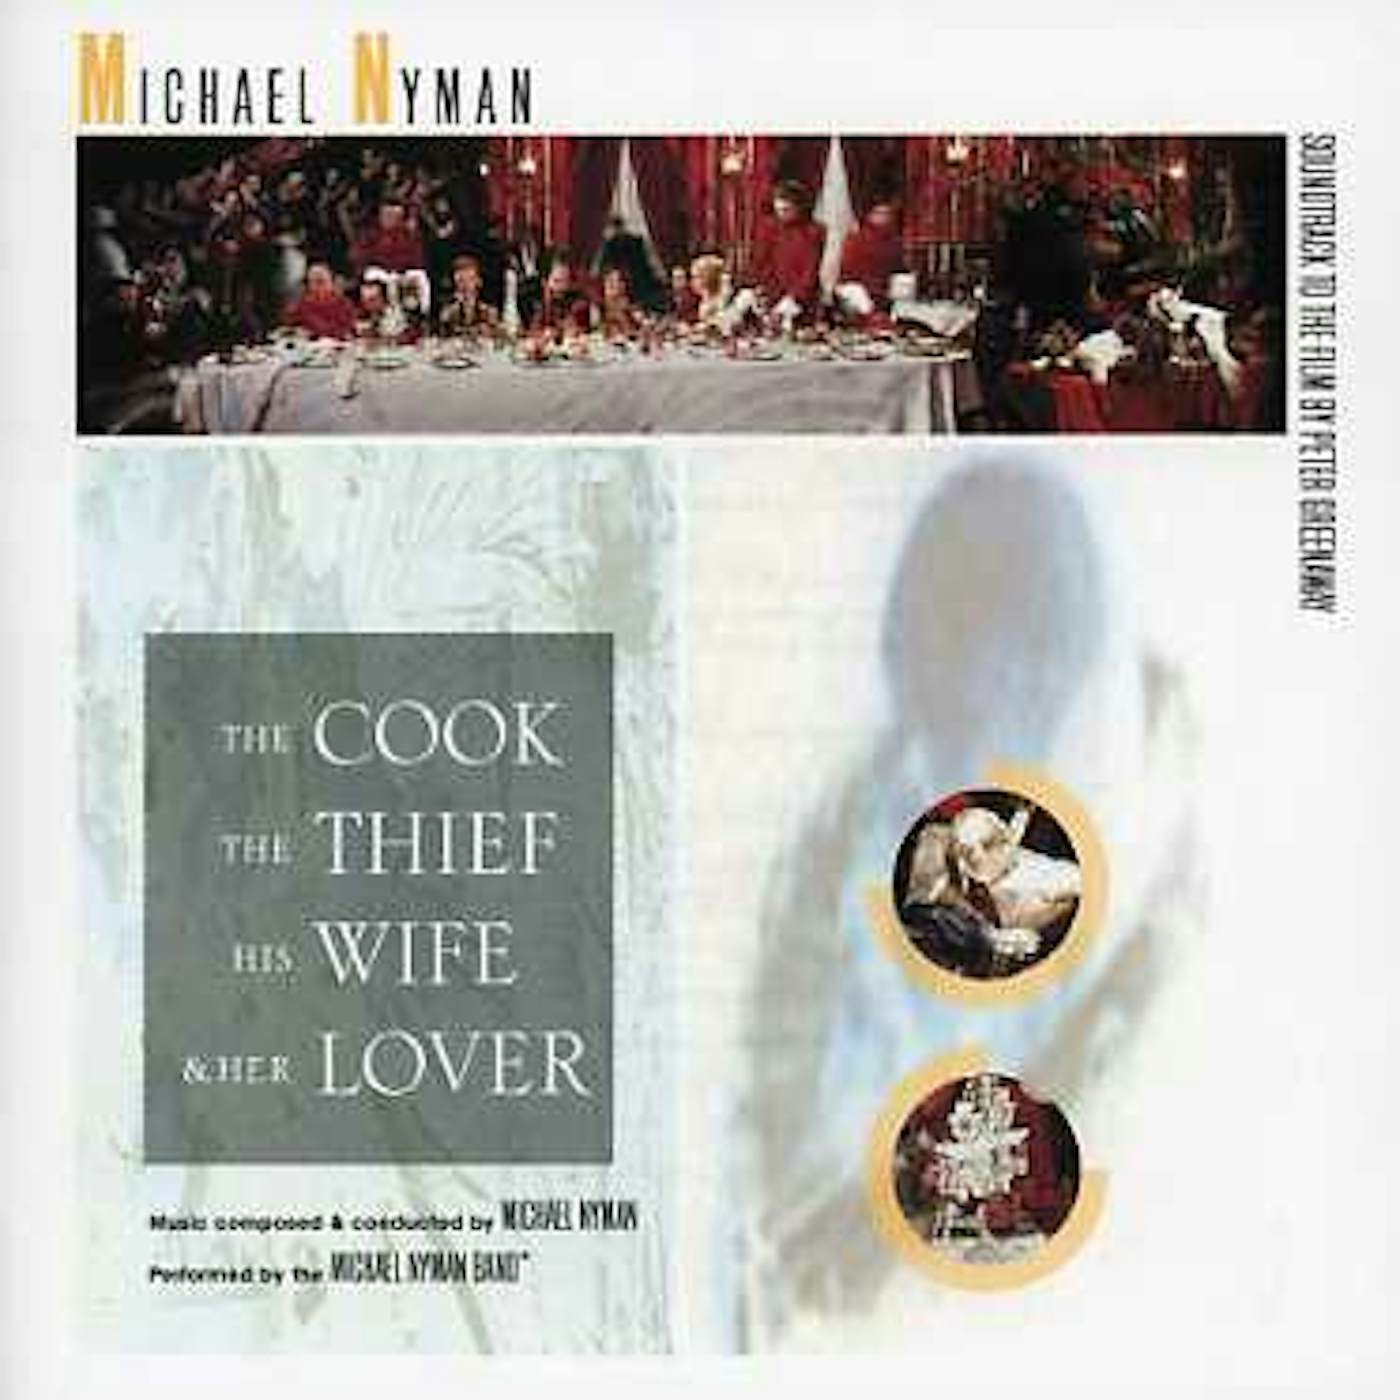 Michael Nyman COOK THE THIEF HIS WIFE & HER LOVER CD